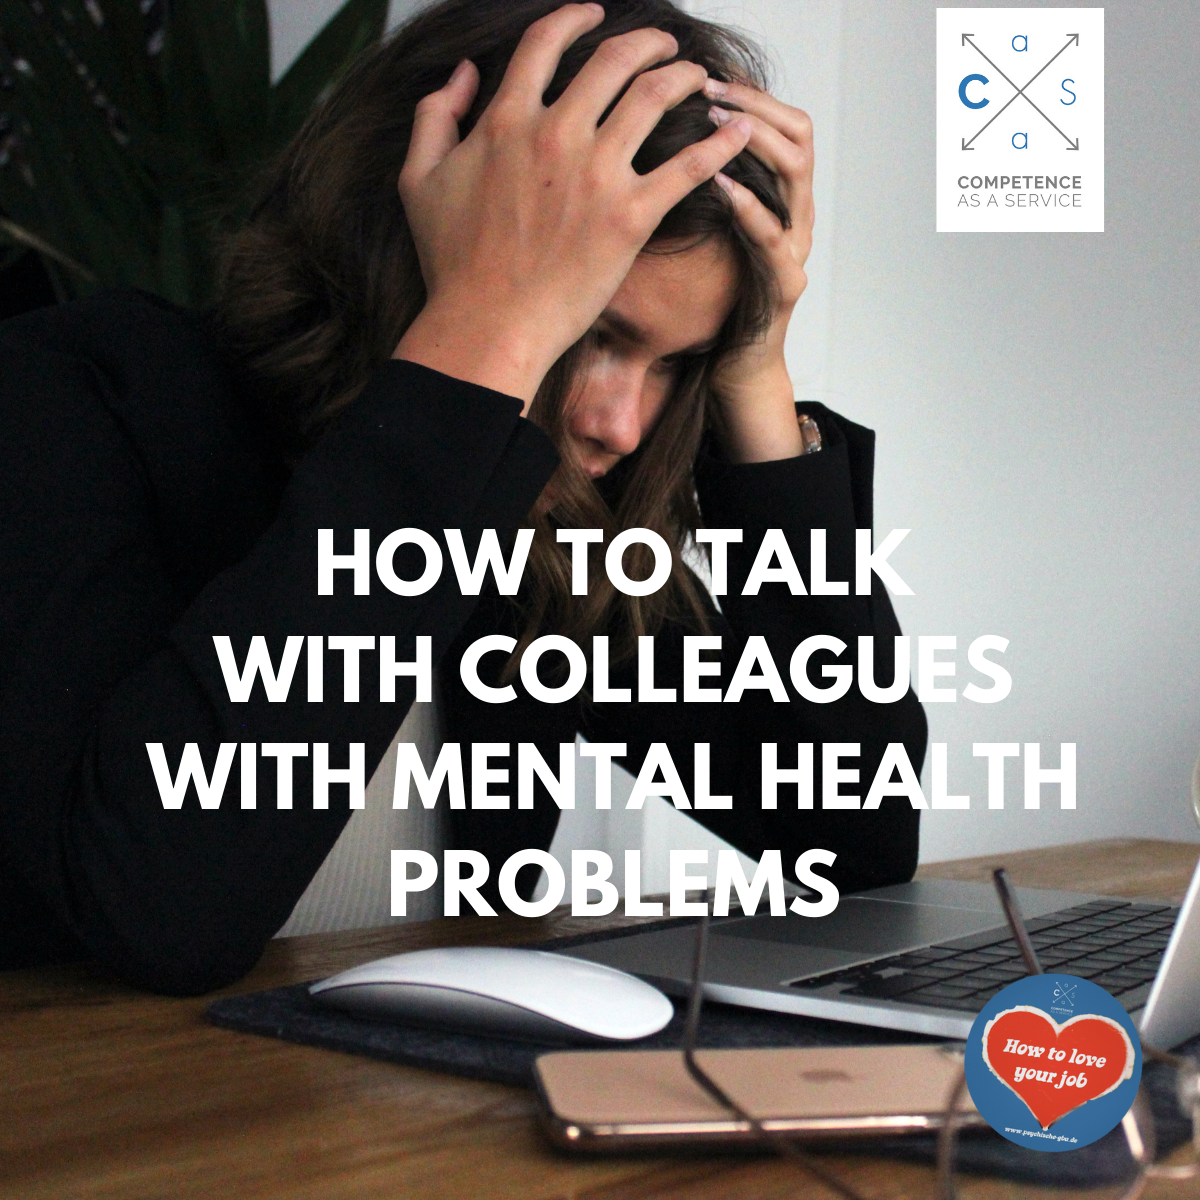 How to talk with colleagues with mental health problems